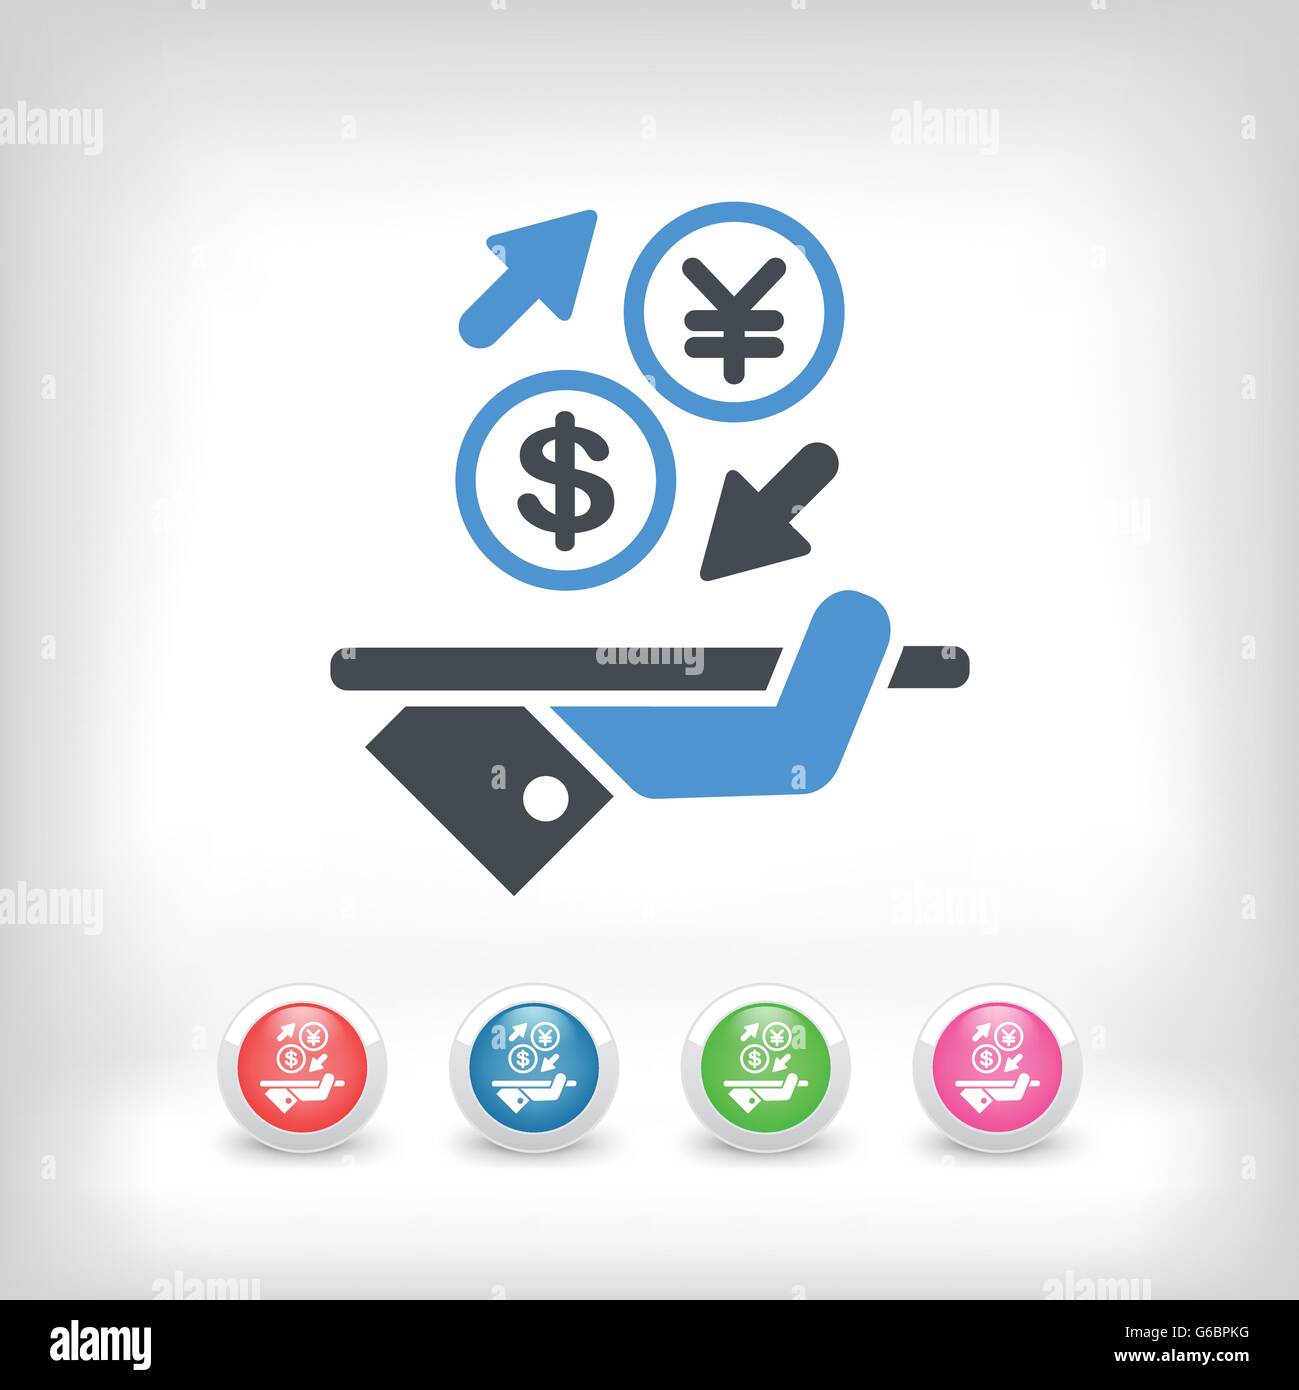 Dollar/Yuan - Foreign currency exchange icon Stock Vector